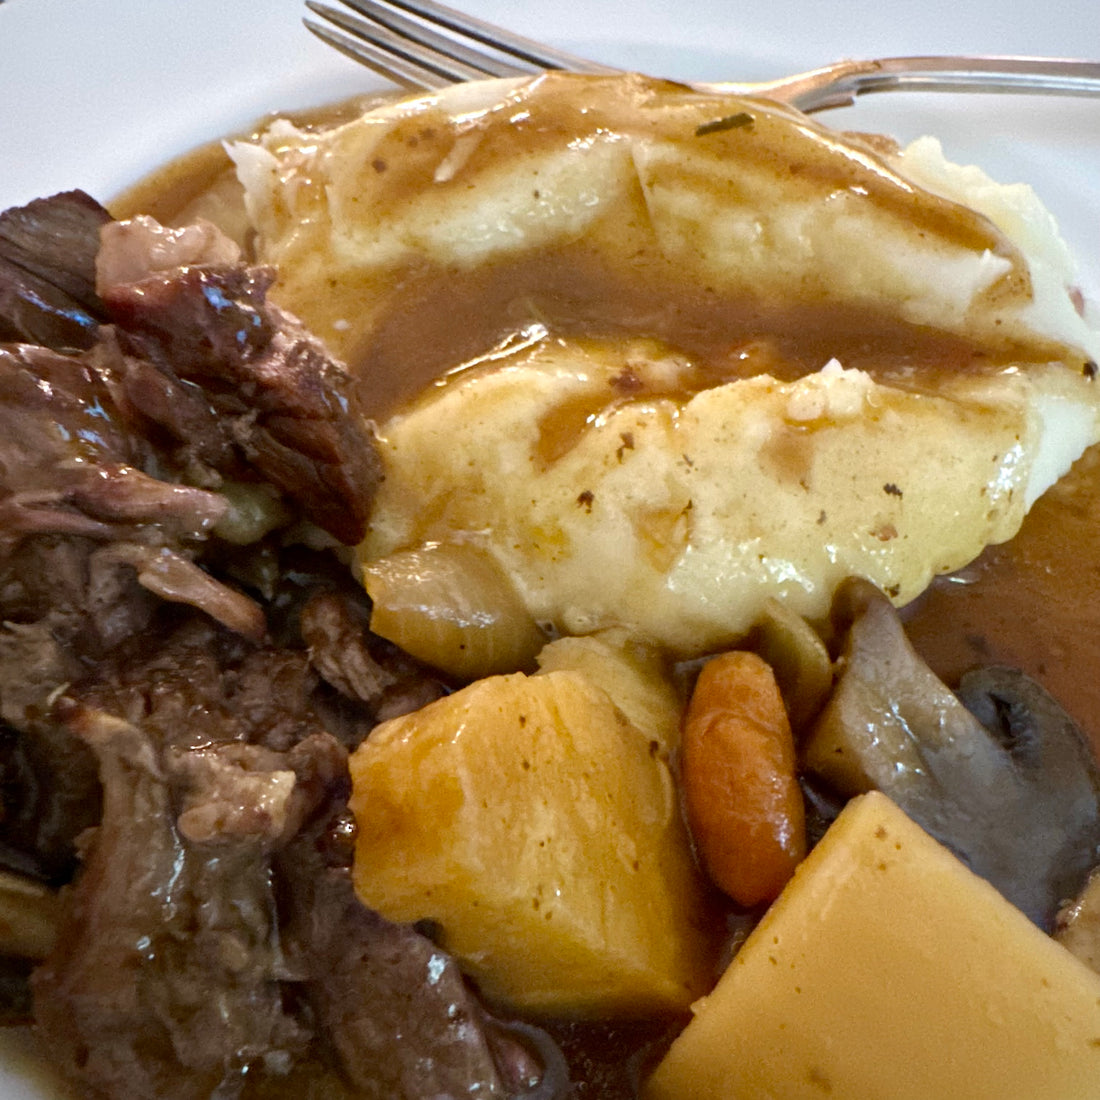 For a good time (and a winter warm-up), just add wine and pot roast!